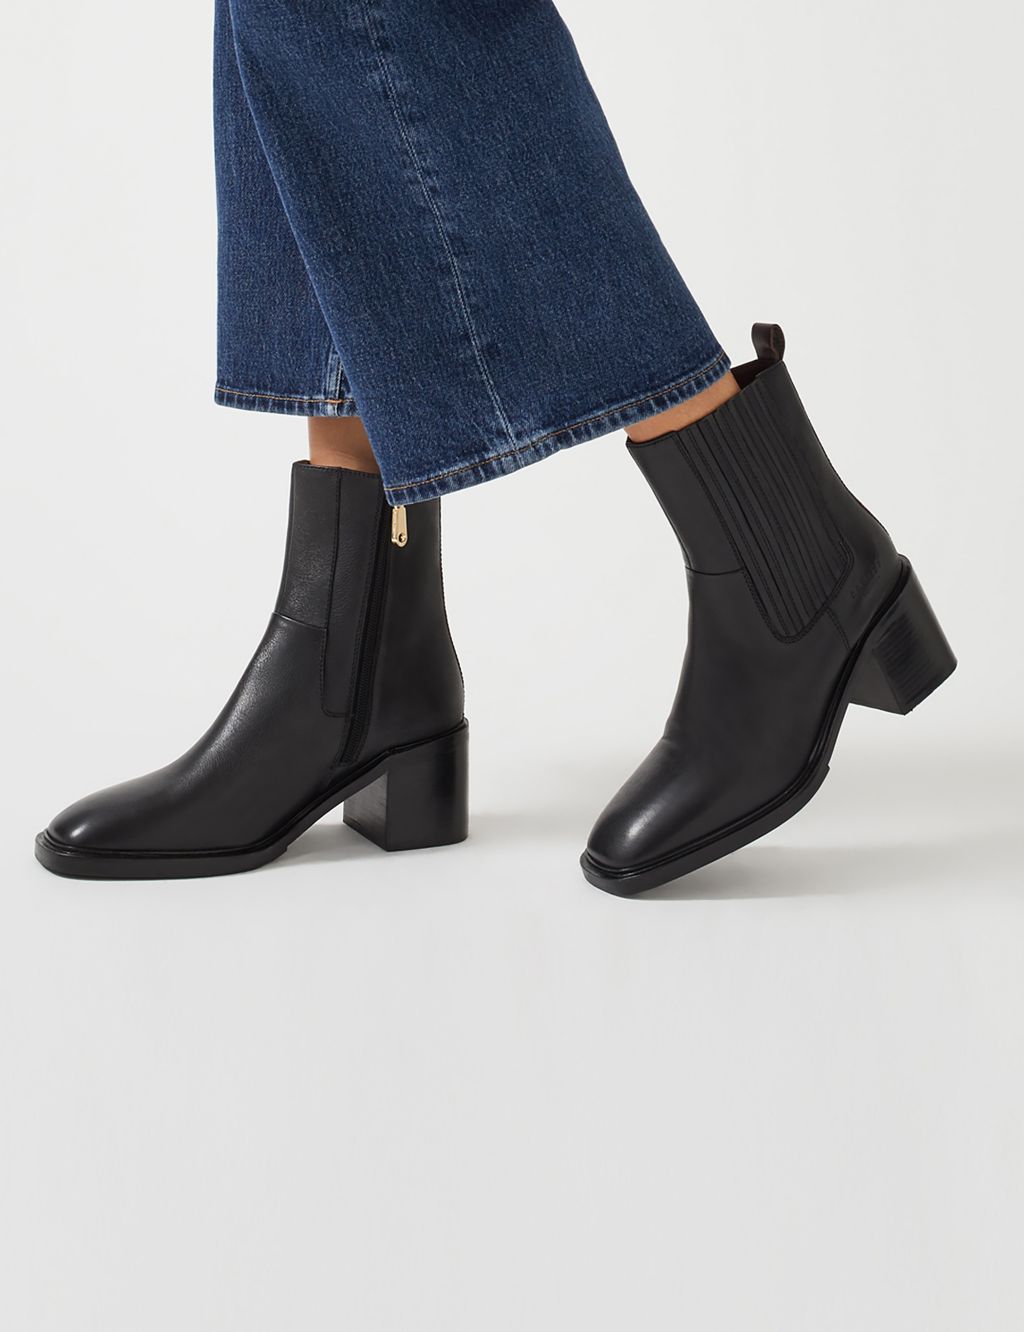 Leather Chelsea Block Heel Ankle Boots image 1